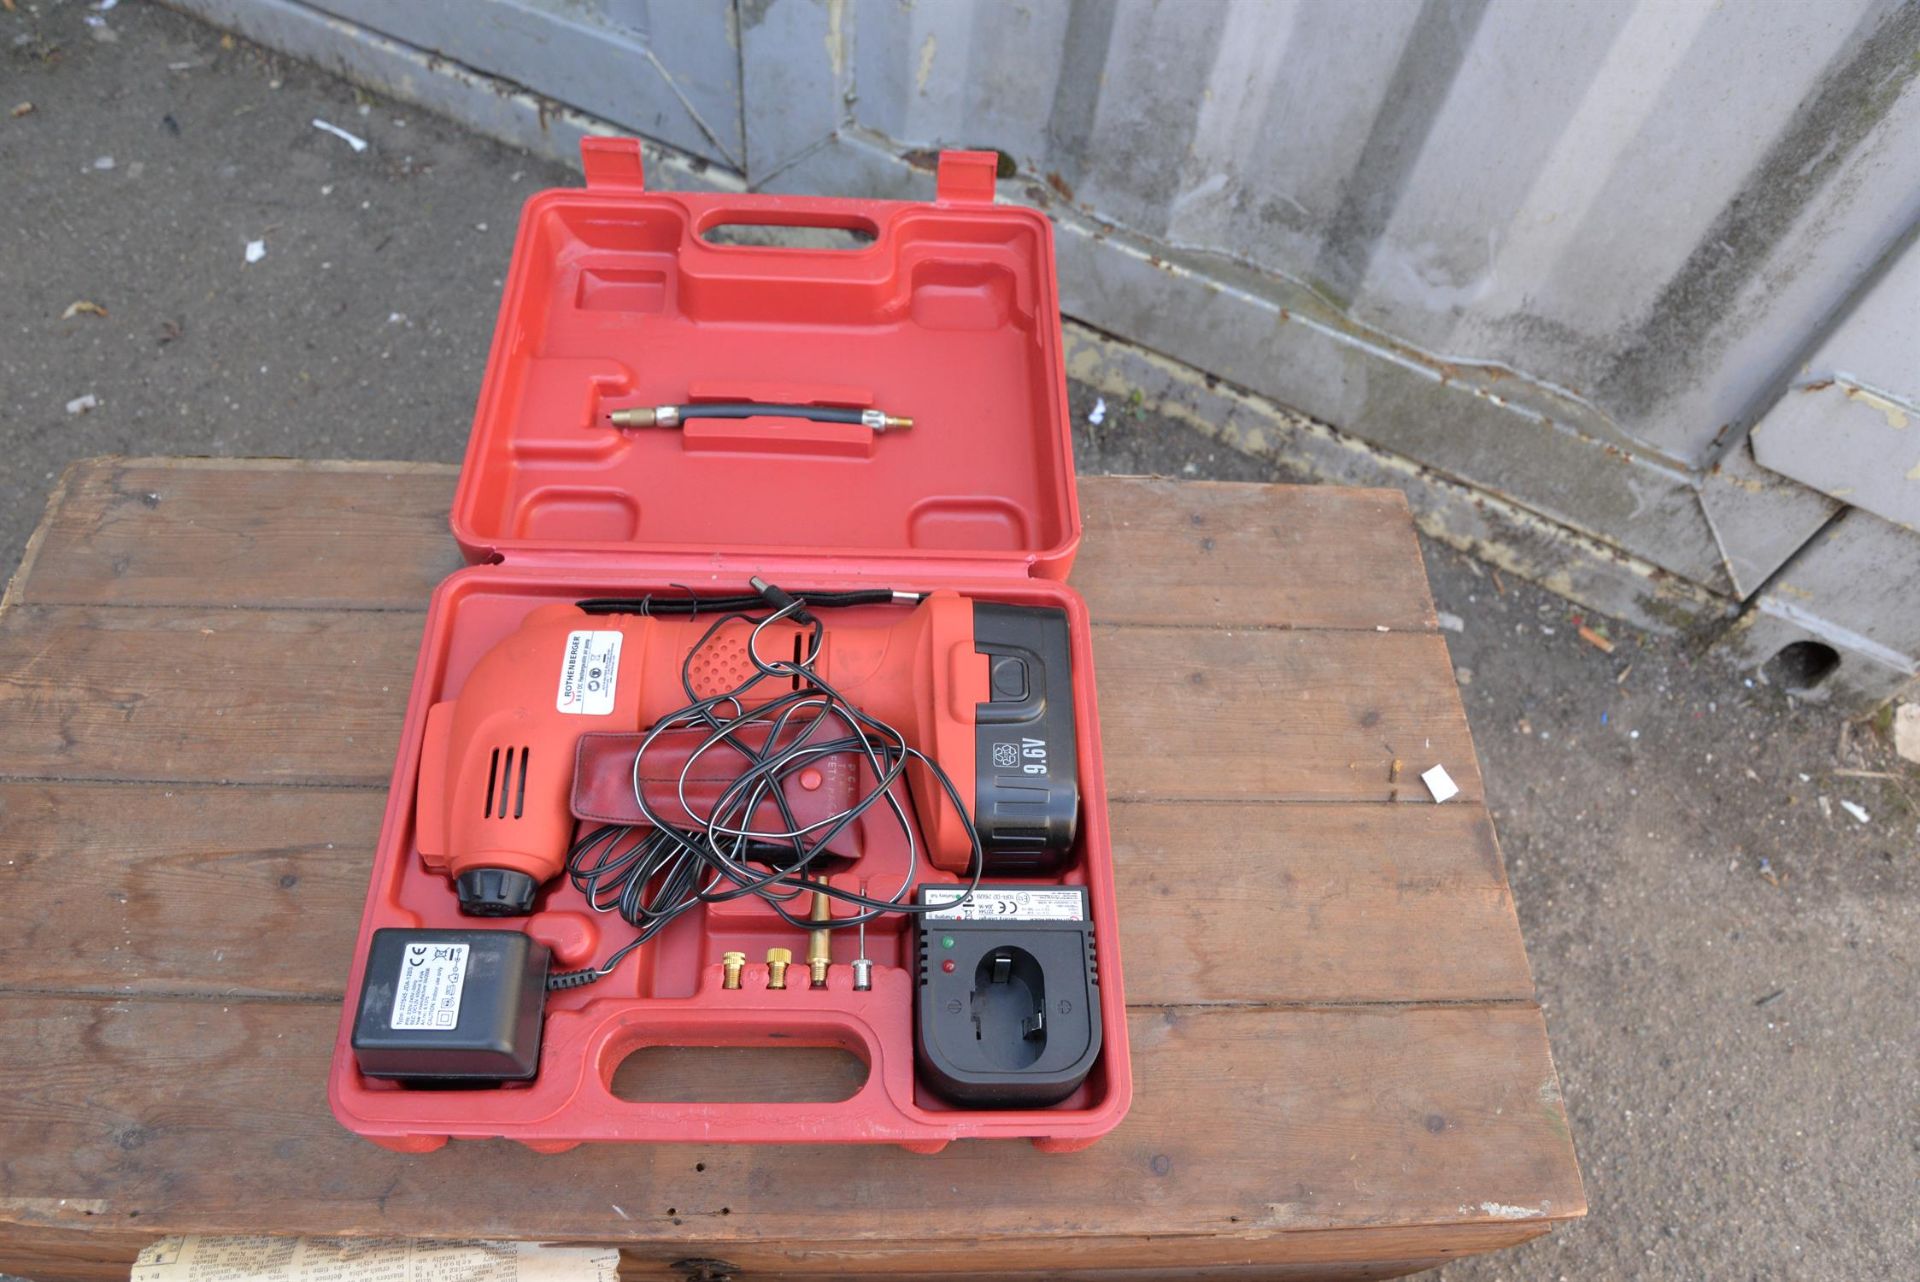 Rothenberger battery operated tyre compressor.